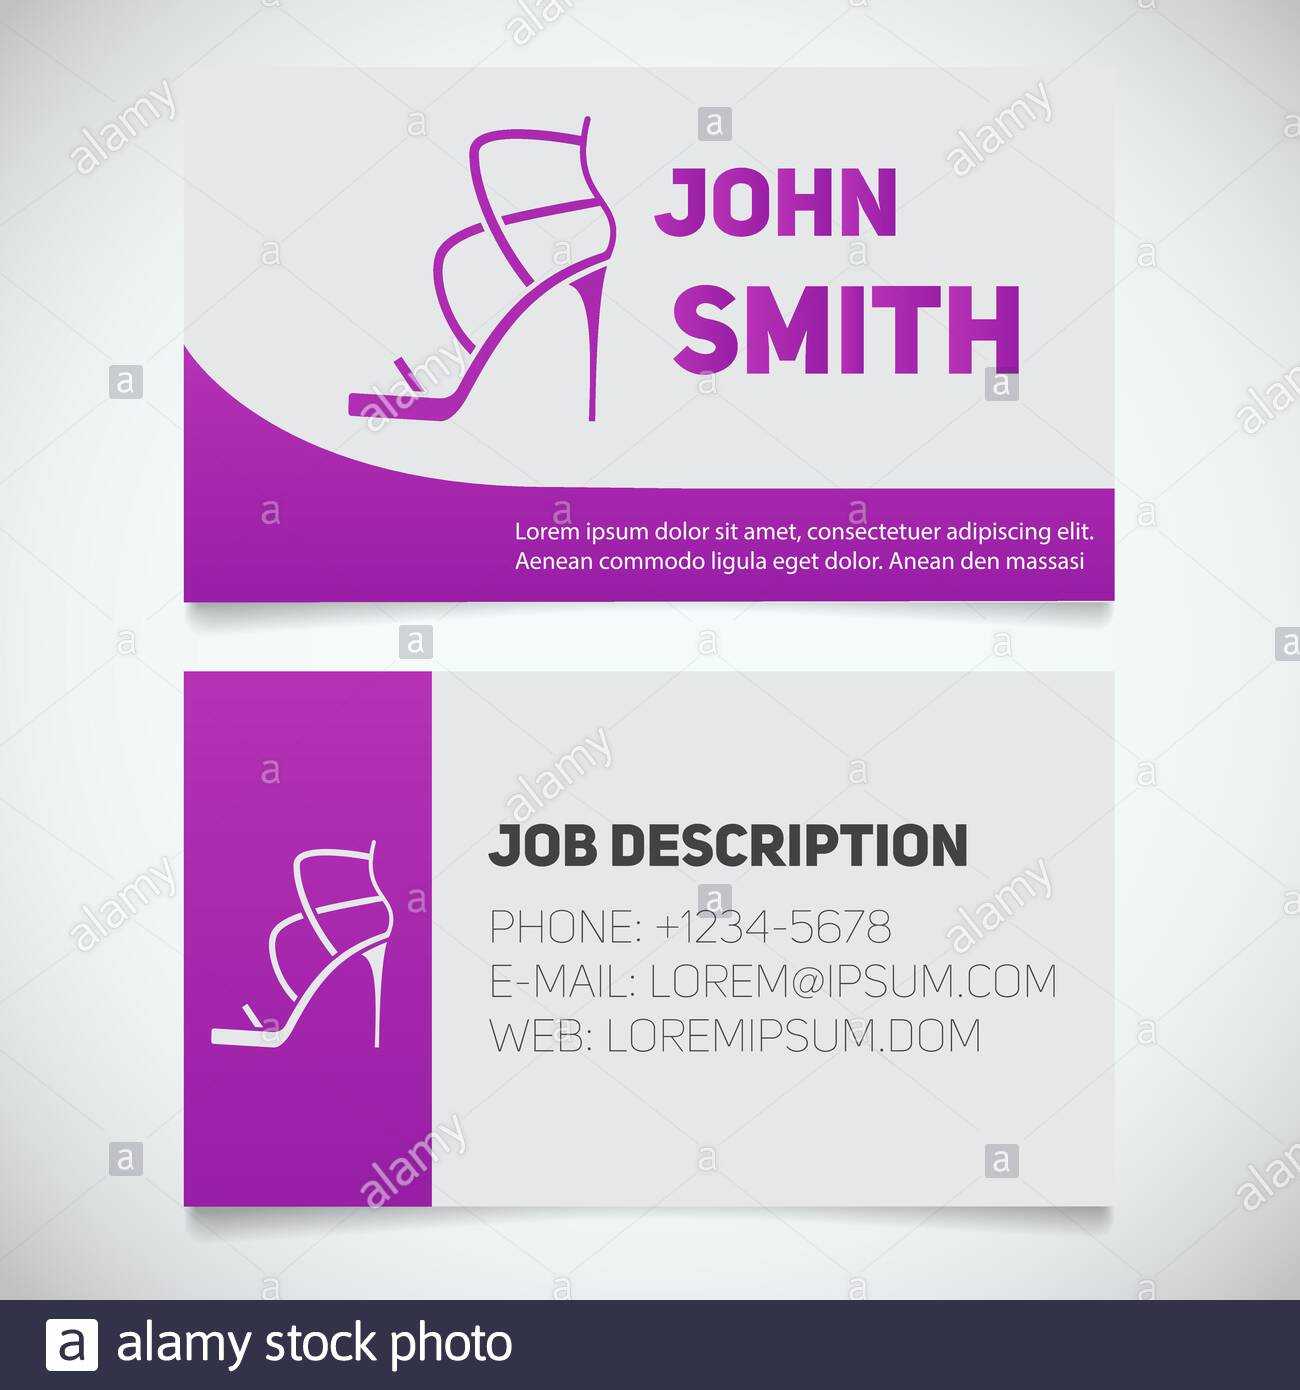 Business Card Print Template With High Heel Shoe Logo Regarding High Heel Shoe Template For Card